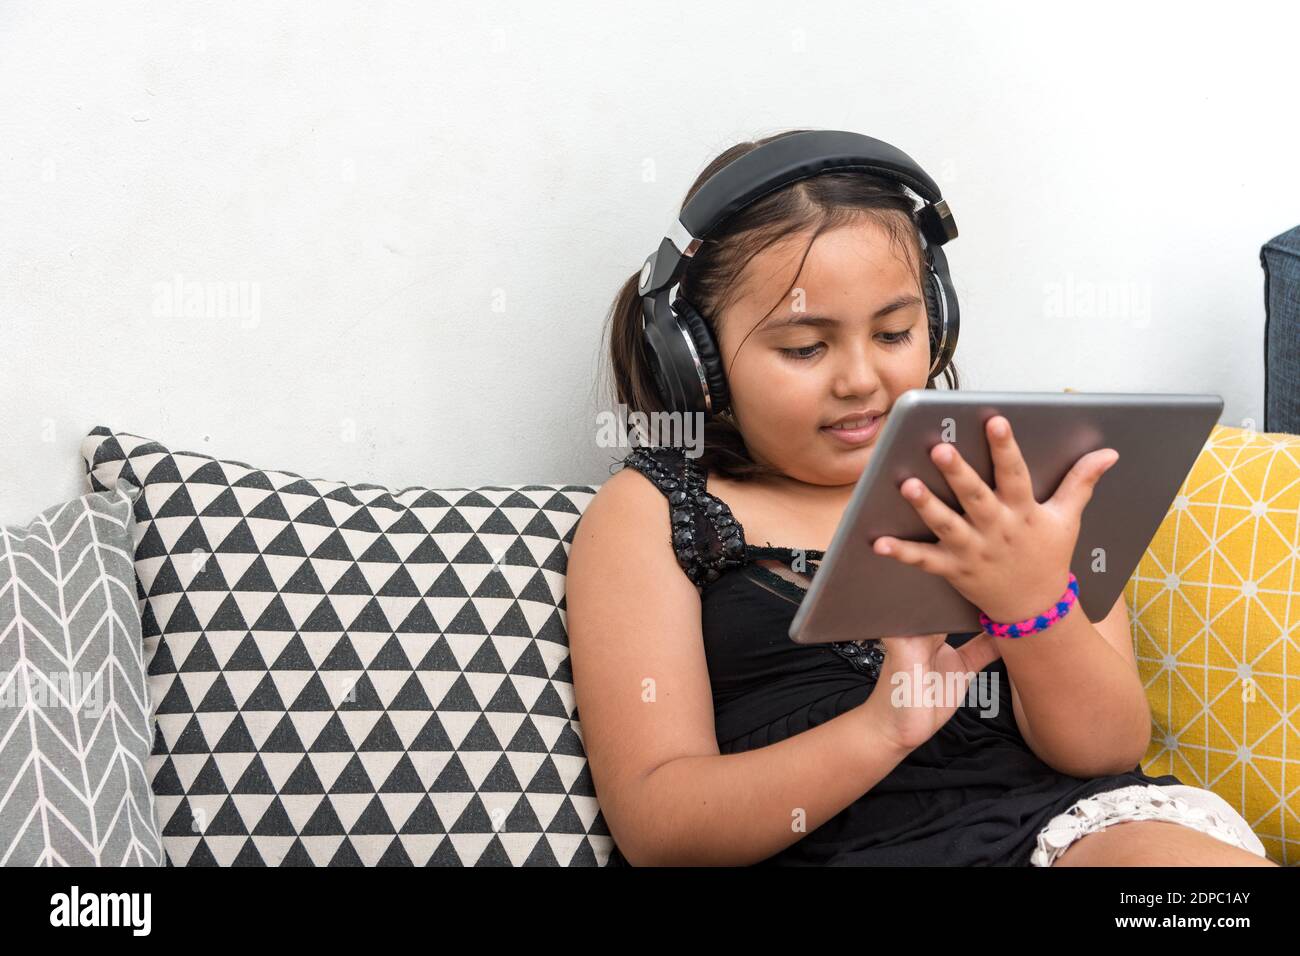 Girl Listening To Music While Using Digital Tablet On Sofa At Home Stock Photo